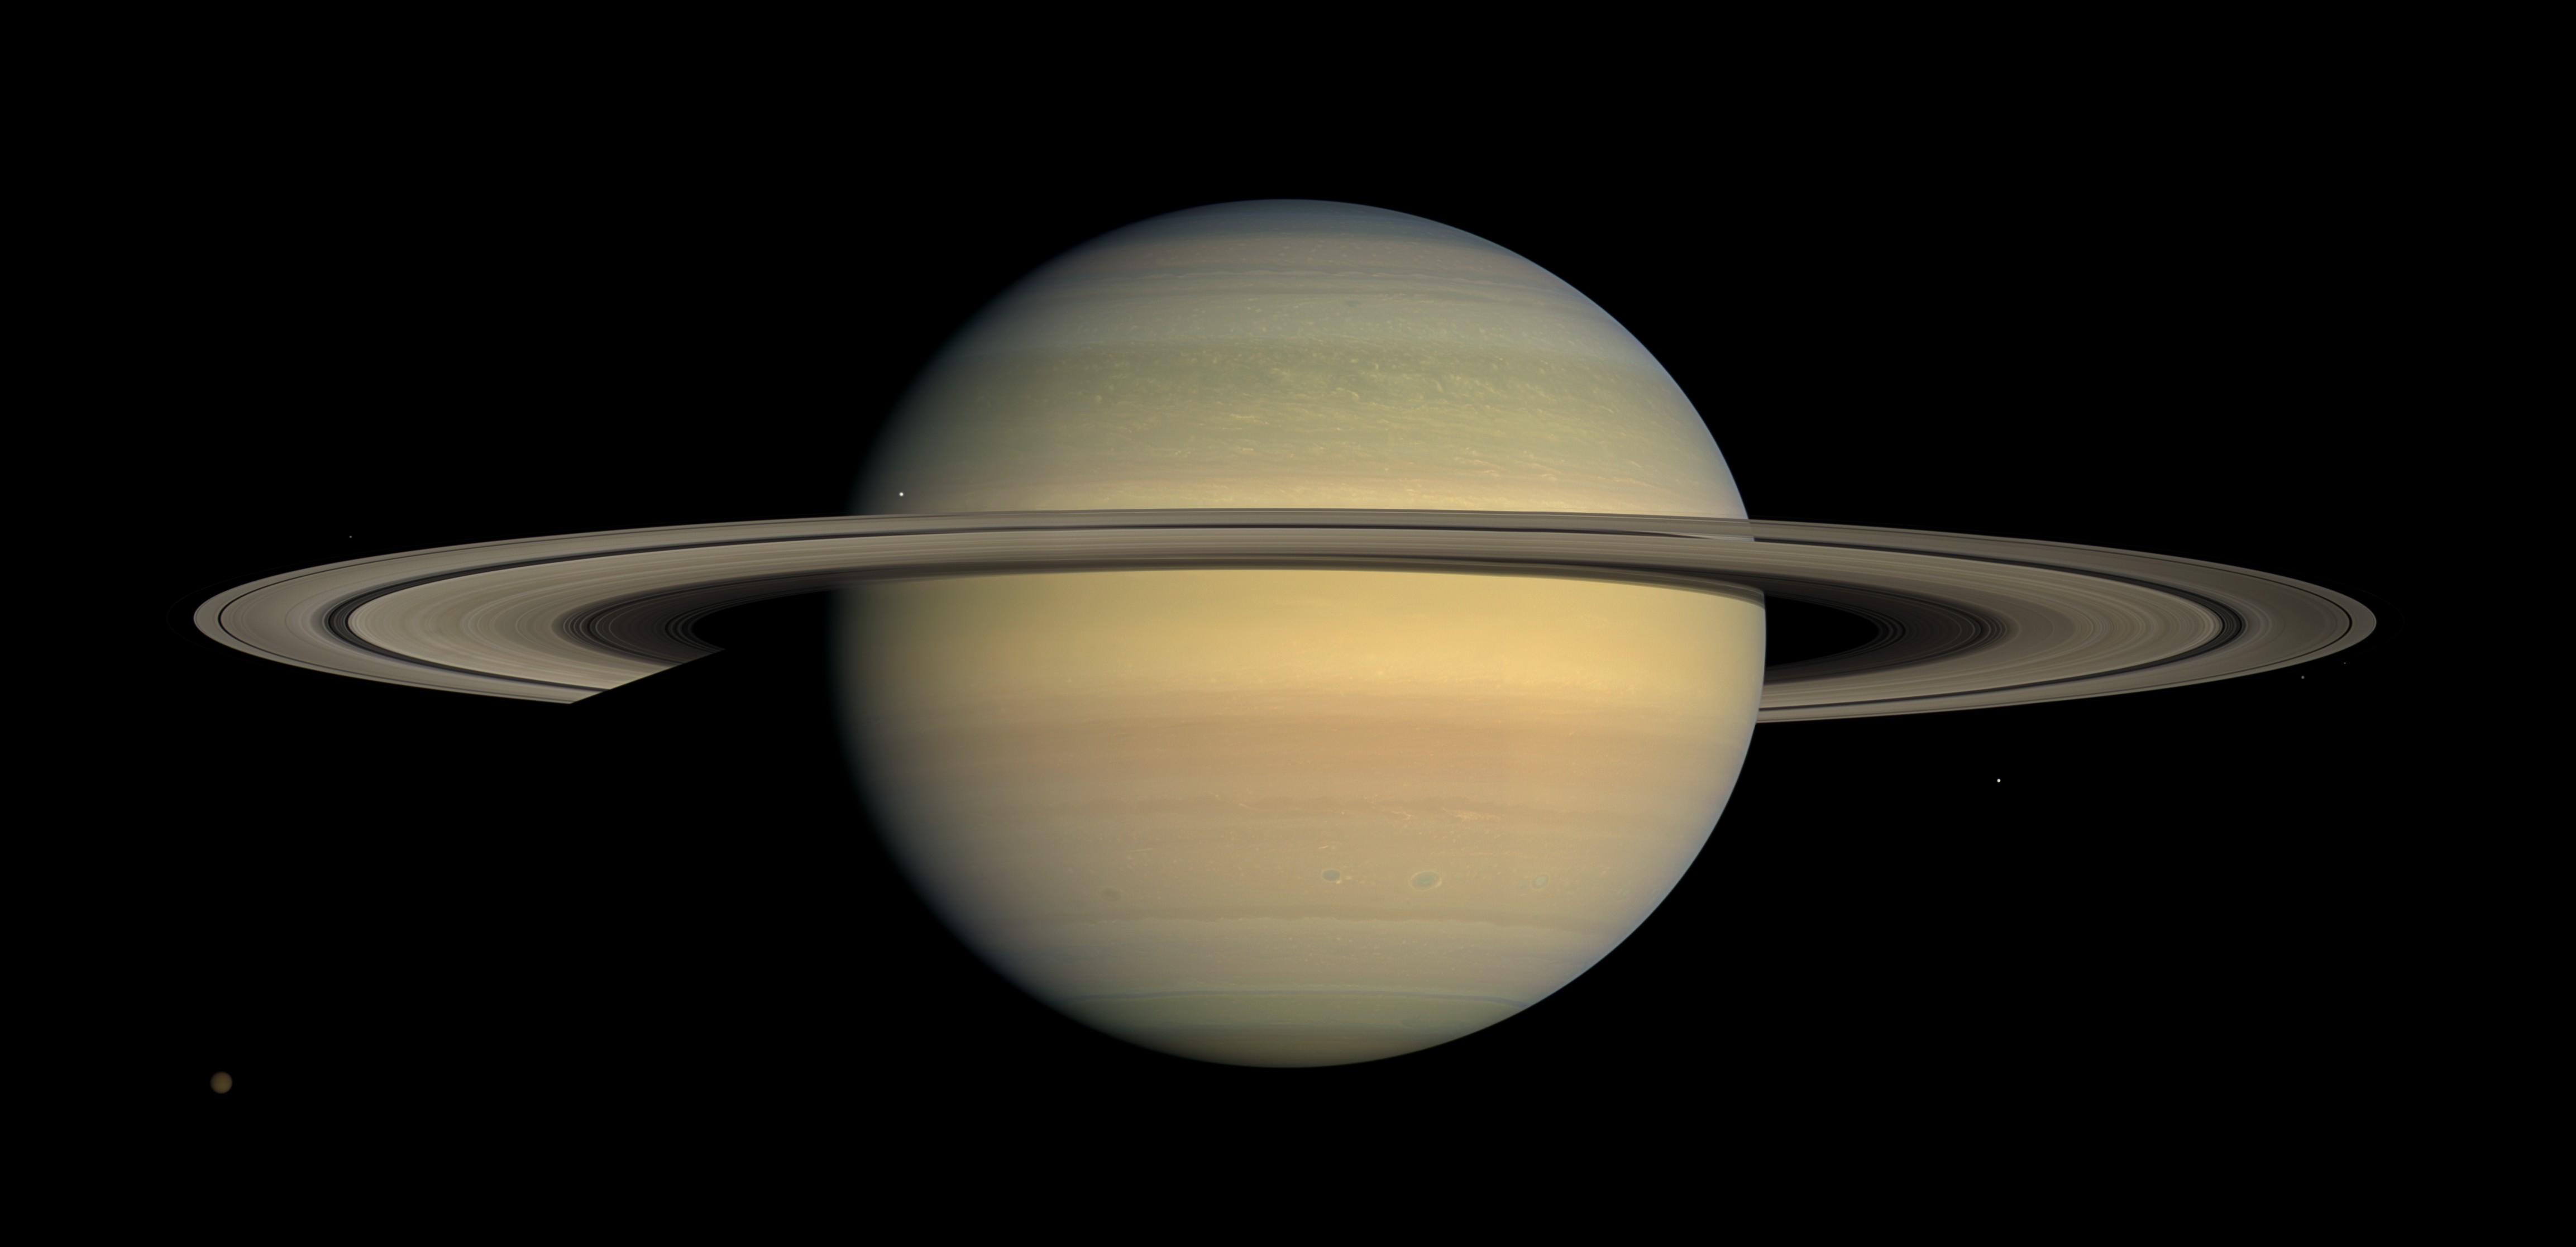 Saturn, god of abundance and sixth planet from the Sun. This image is from NASA's Cassini spacecraft but the planet and its rings are visible through a telescope from Pittsburgh.